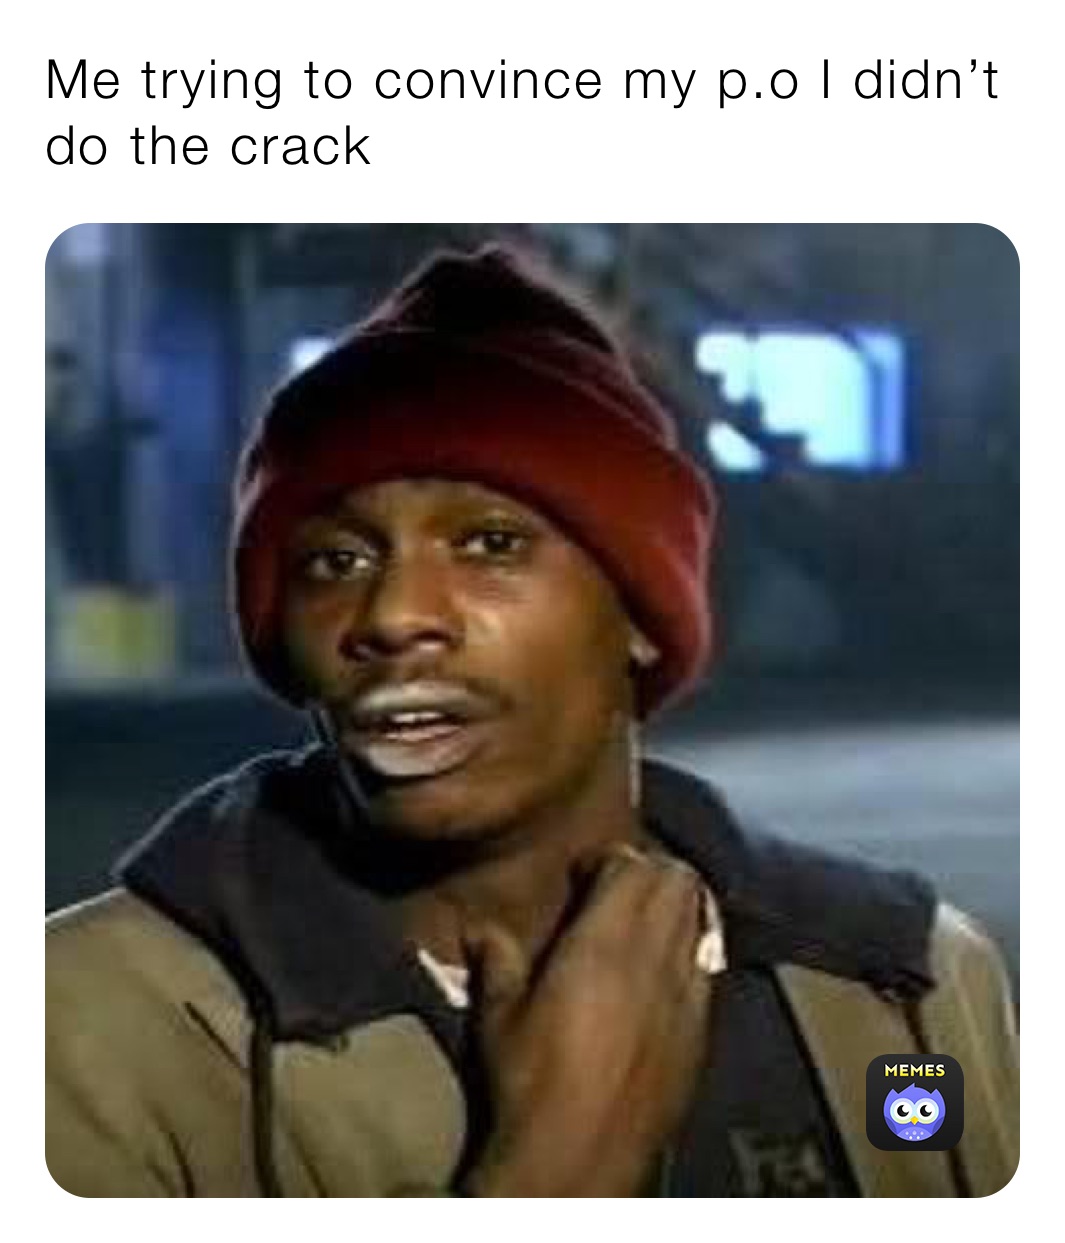 Me trying to convince my p.o I didn’t do the crack